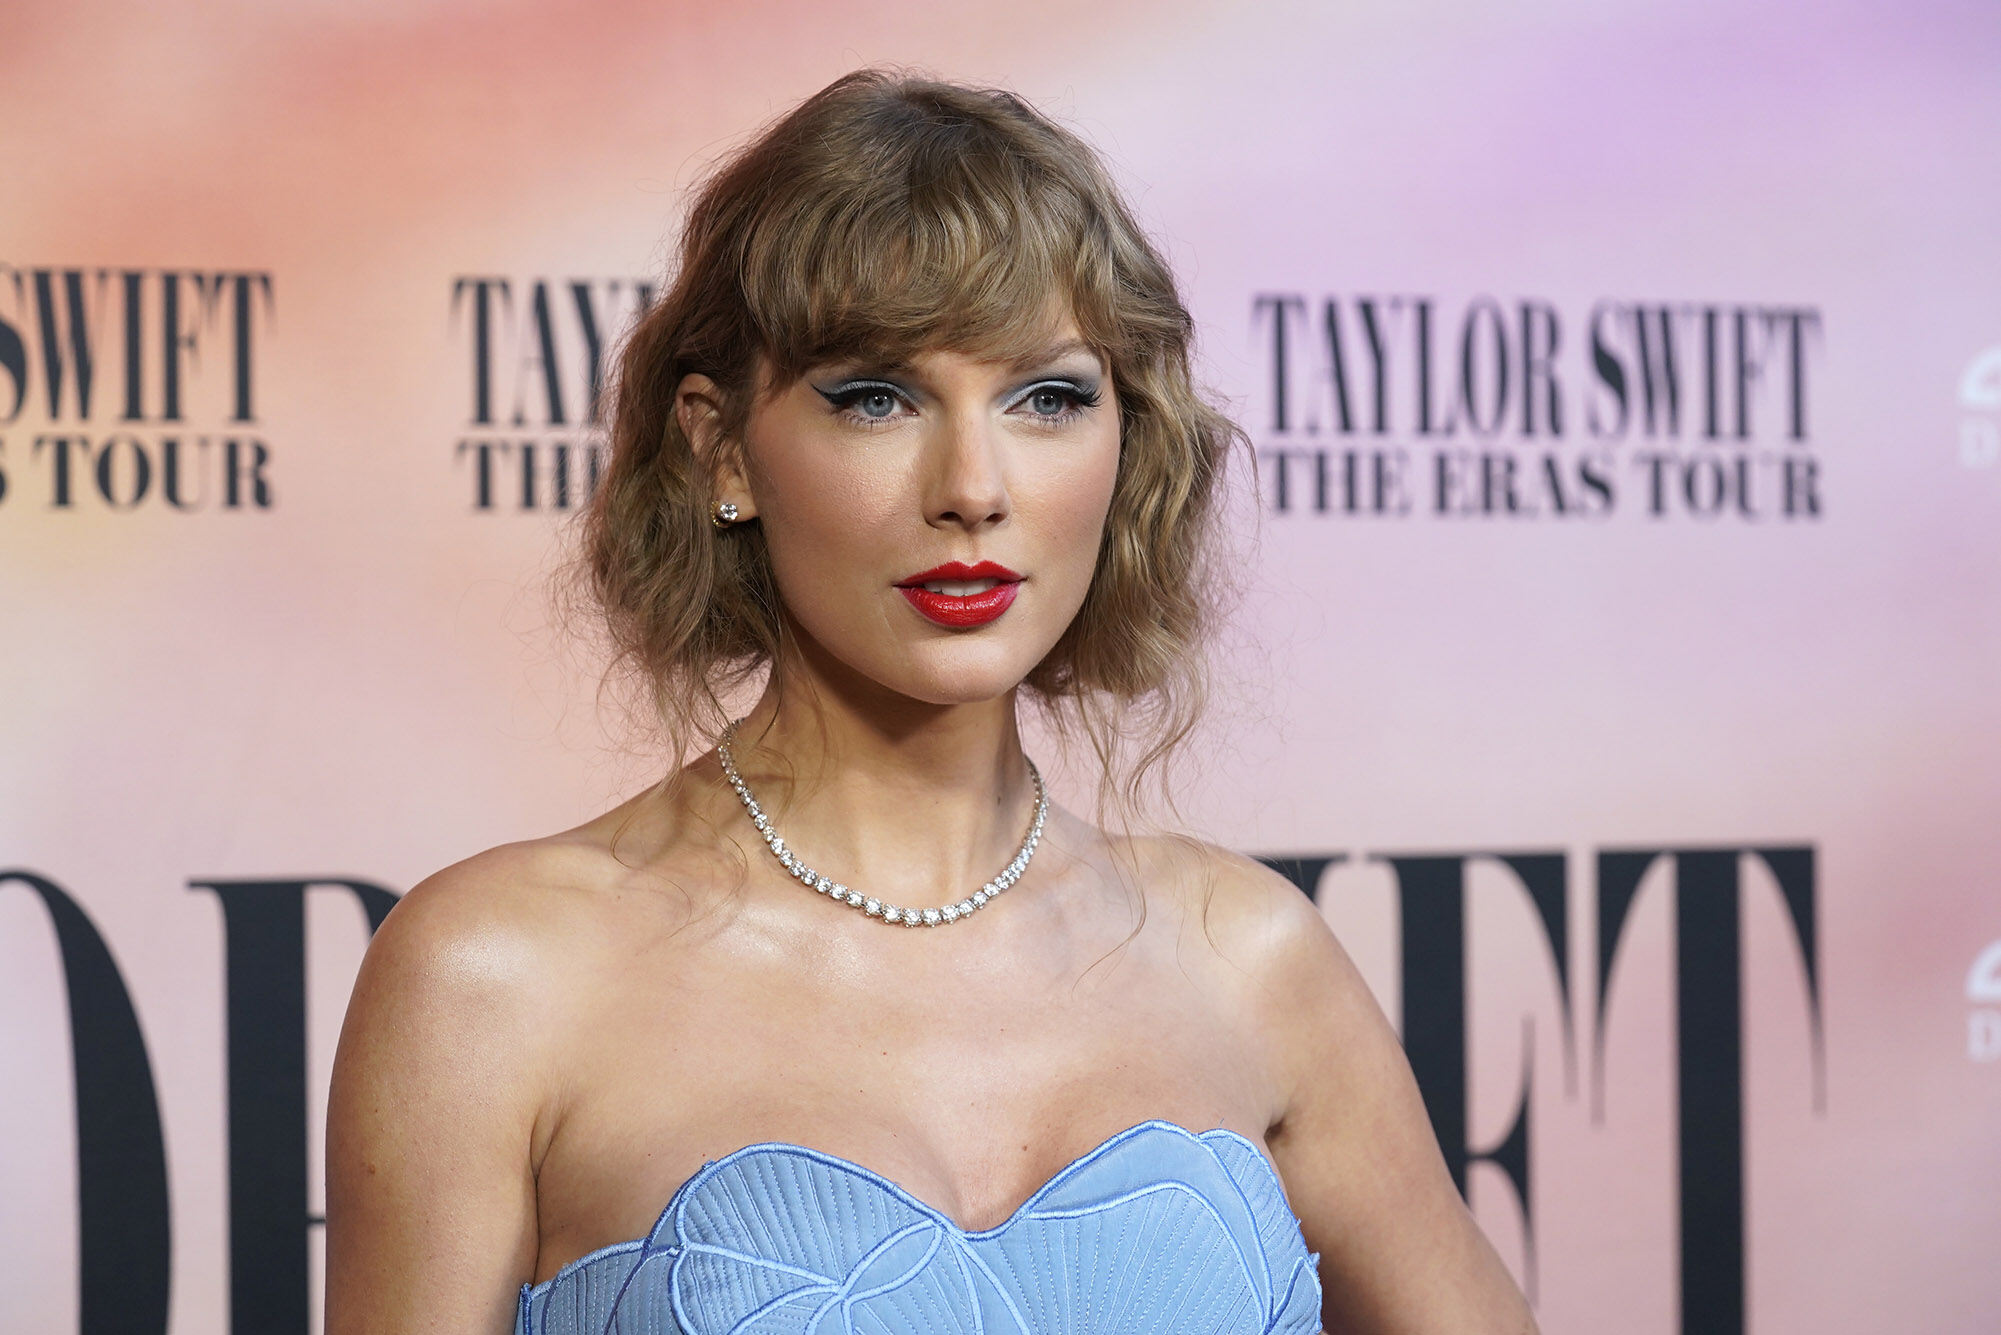 Taylor Swift's Onstage Cough Sparks Concern Among Fans In Singapore